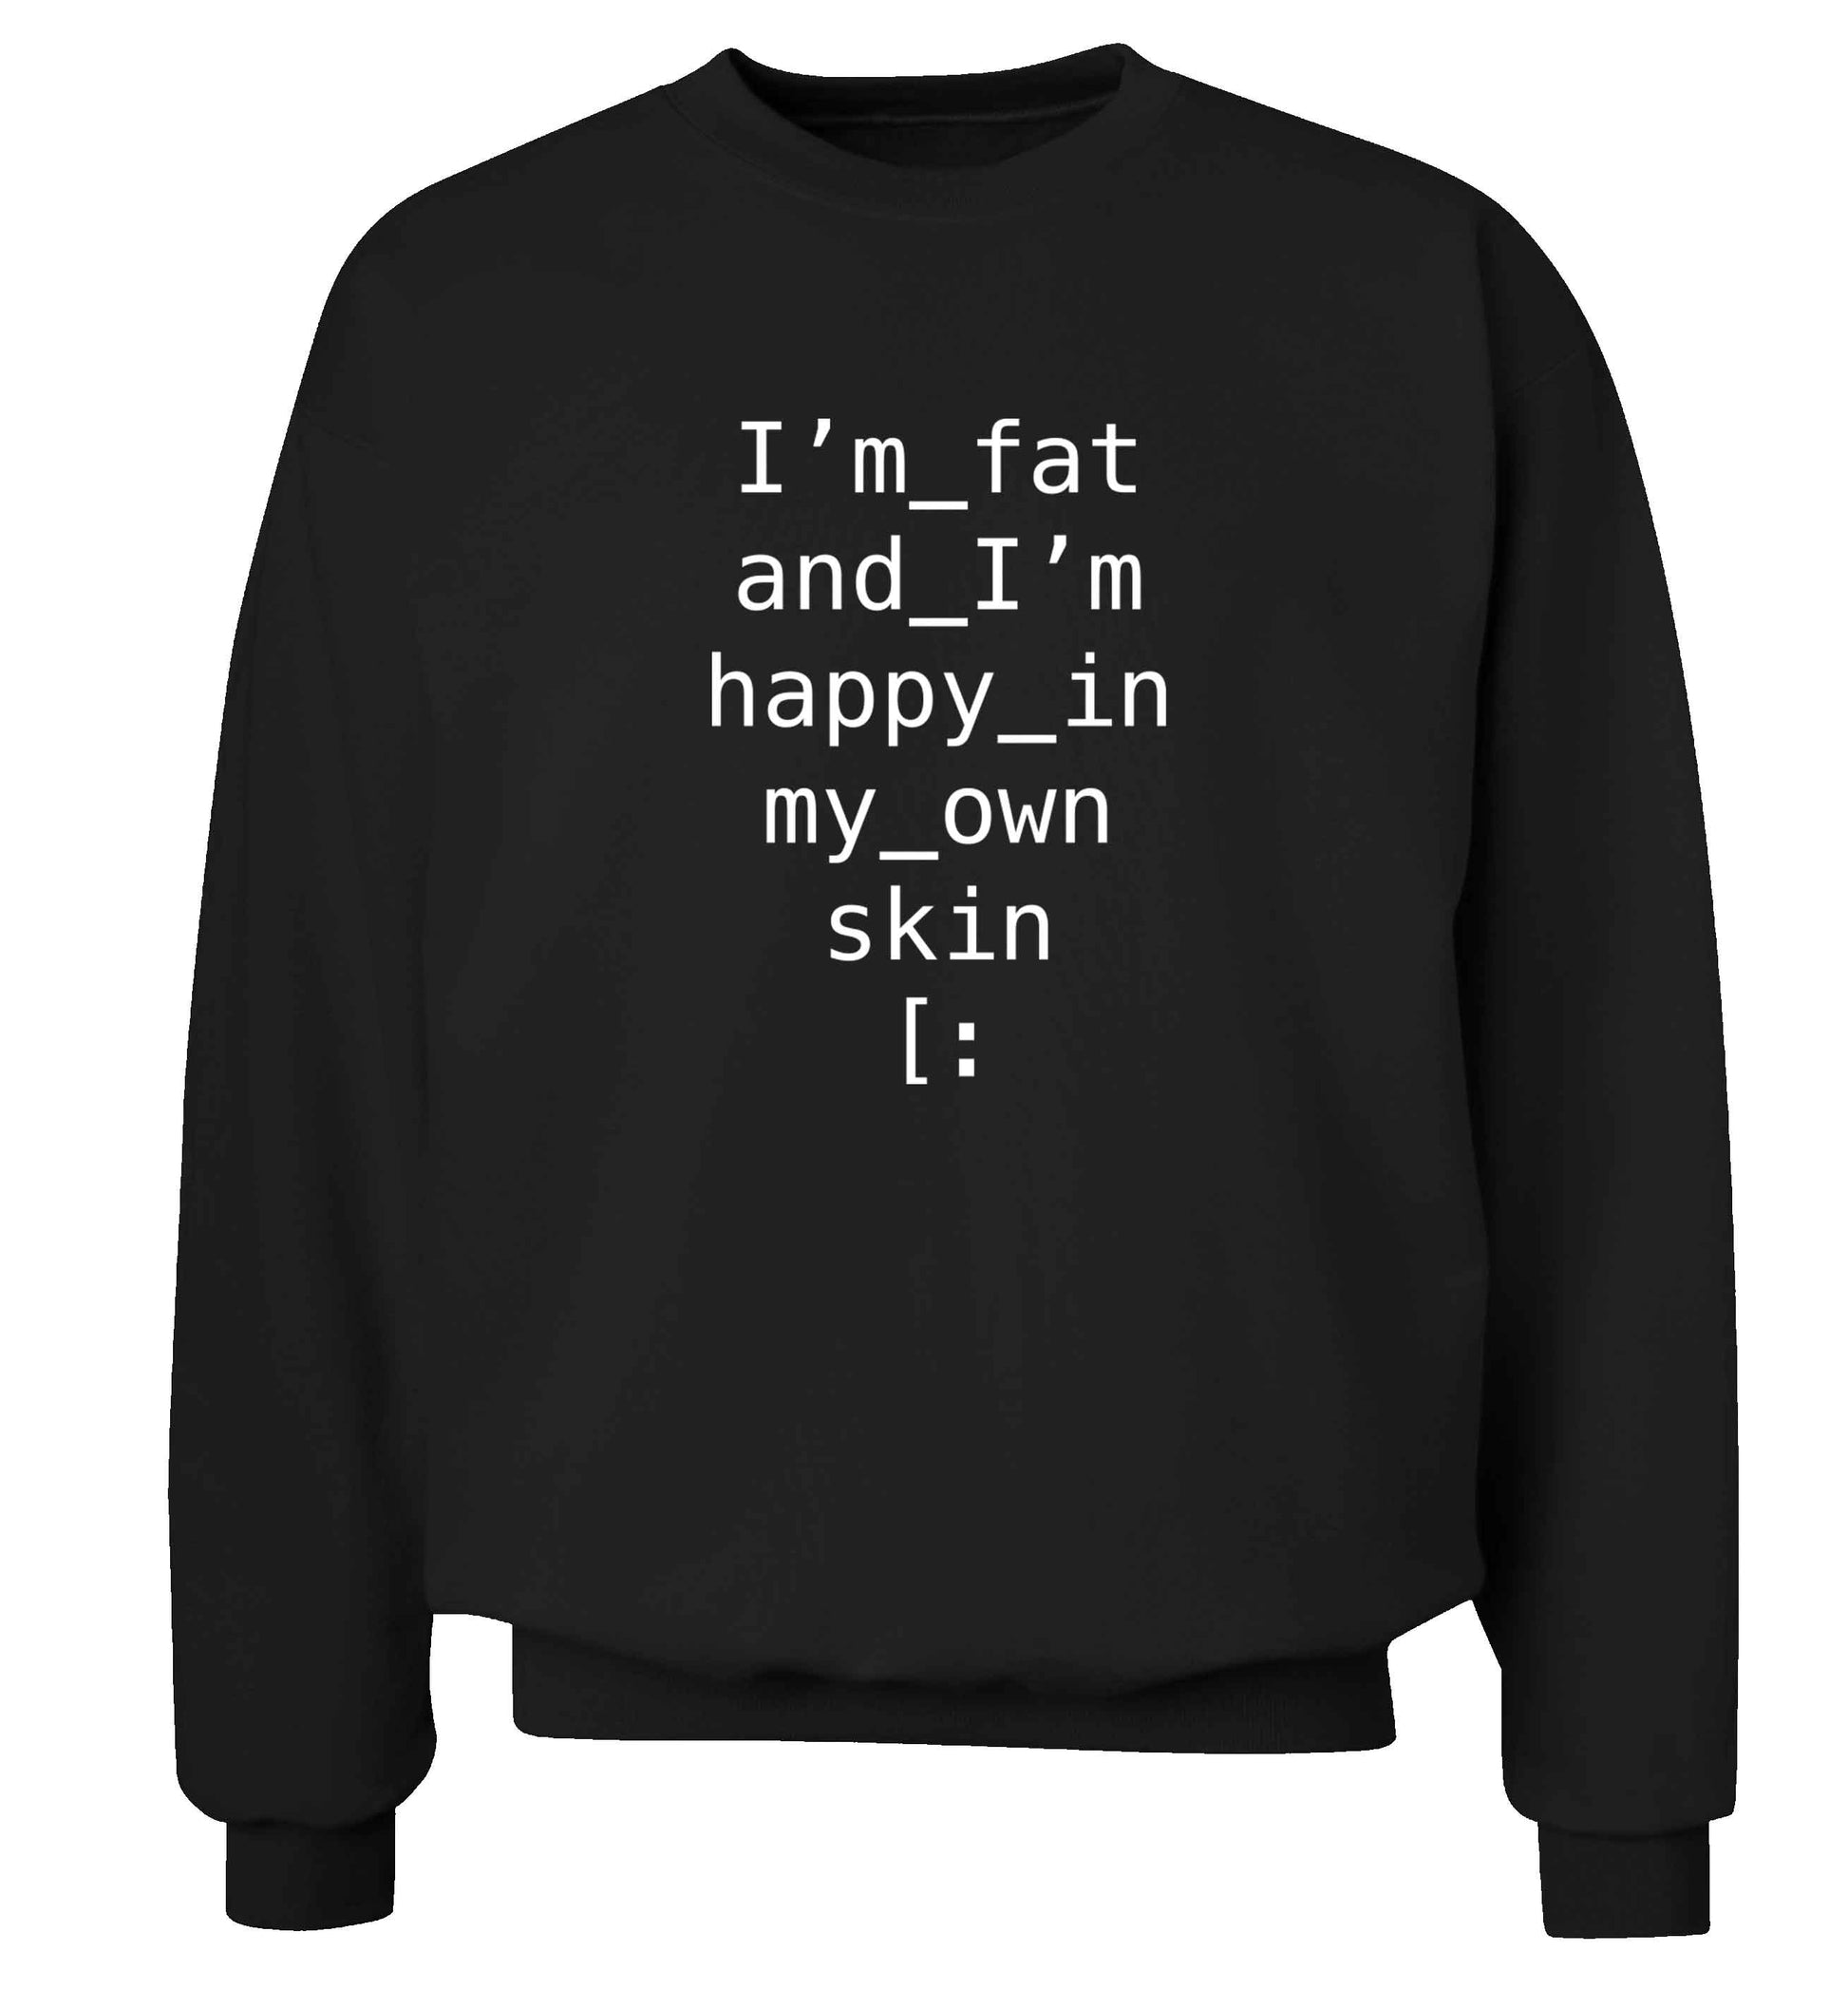 I'm fat and happy in my own skin adult's unisex black sweater 2XL